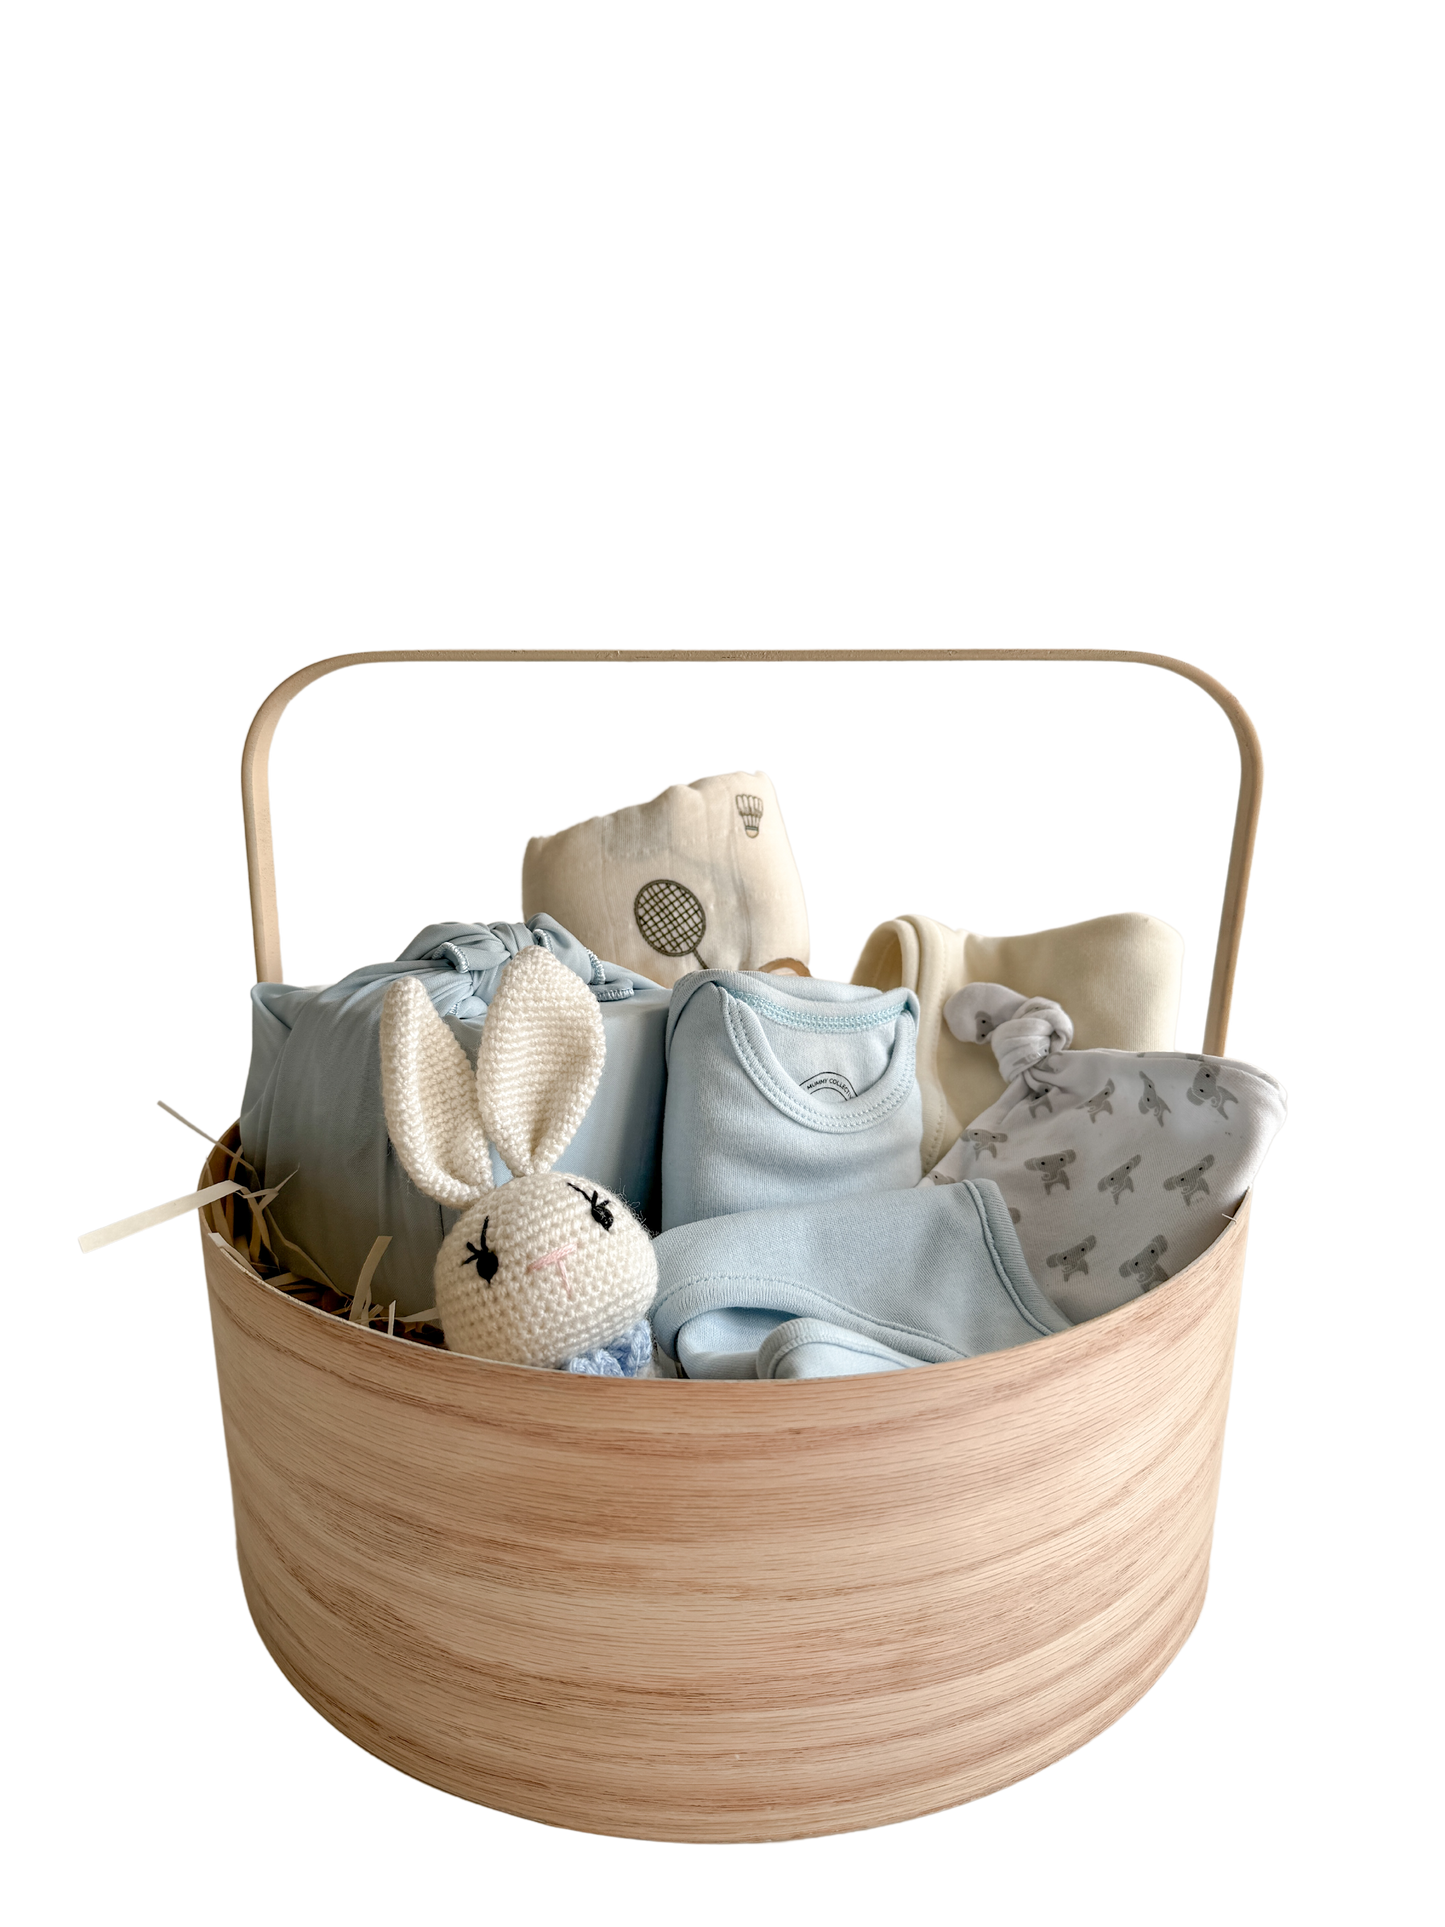 A thoughtful blend of treats for both baby and mama. This chic hamper features essentials for the newest addition to the family, including a soft baby cap, an adorable blue onesie, a stylish bib, and a practical burp cloth – all in delightful blue hues.